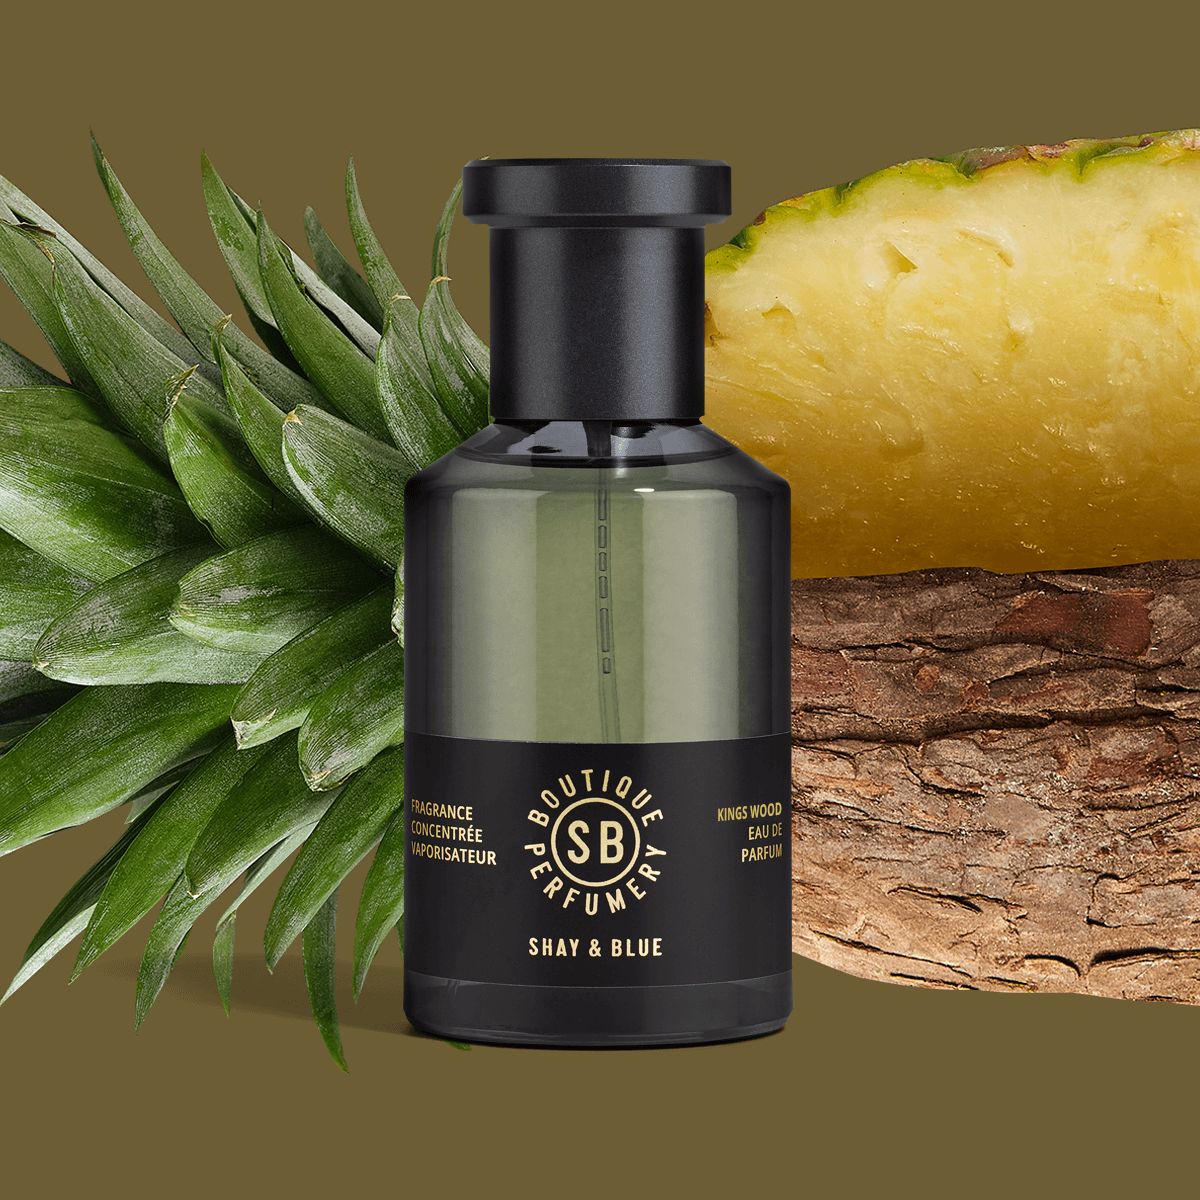 Kings Wood Fragrance Concentrate 100ml | Fresh pineapple with the natural aroma of fearn leaves. | Clean All Gender Fragrance | Shay & Blue